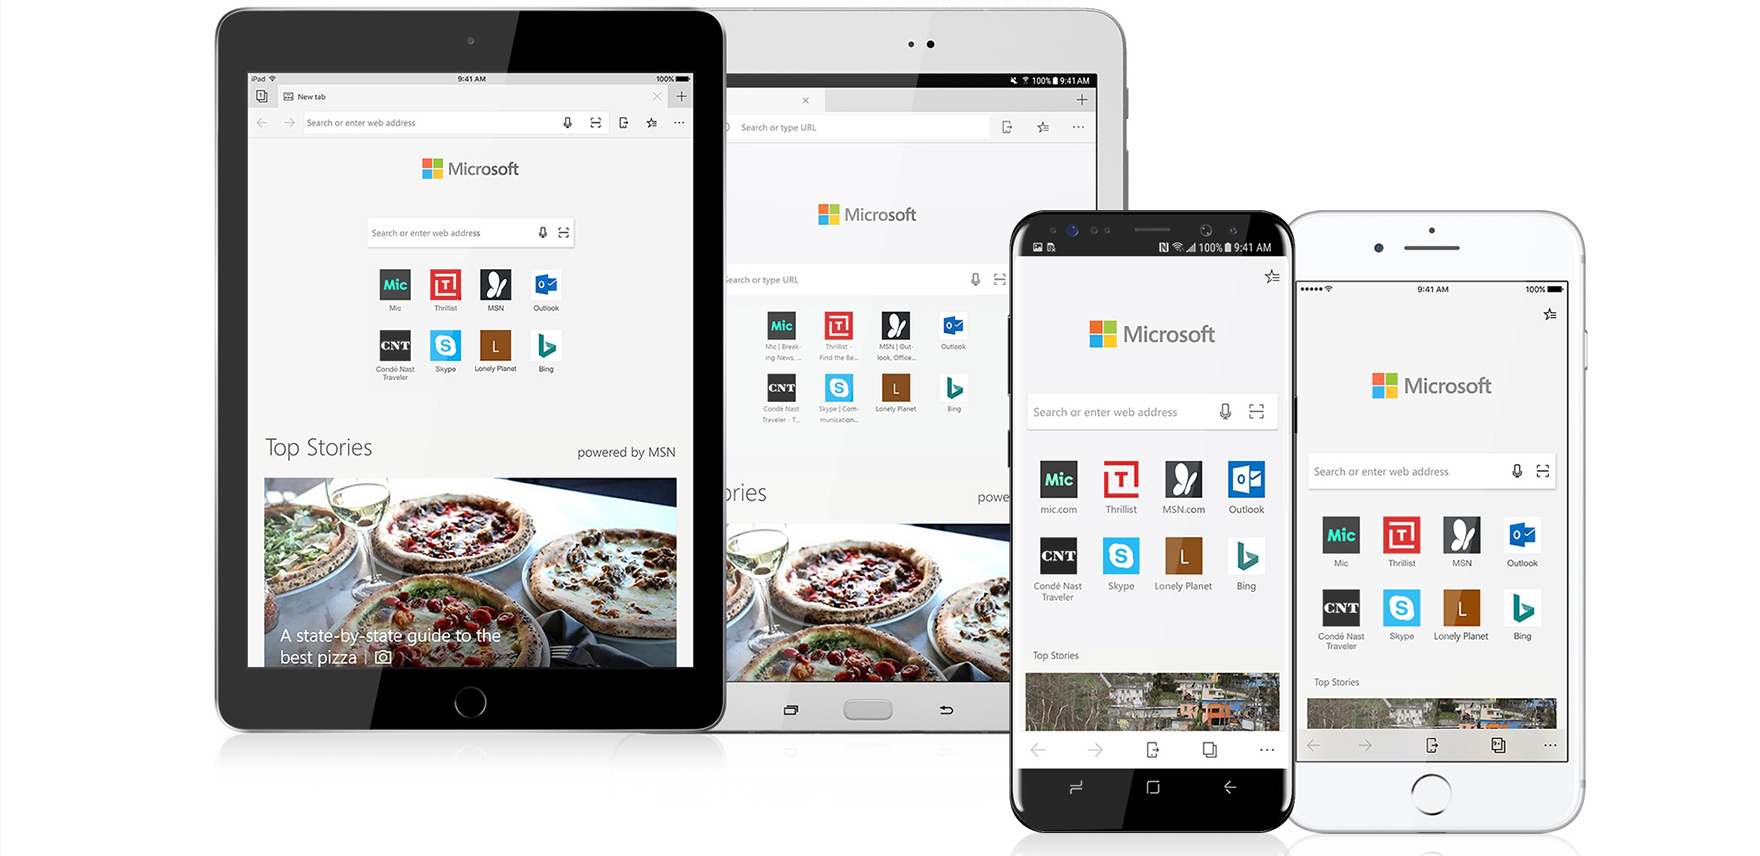 Four devices, two tablets and two smartphones, showing the Microsoft Edge browser